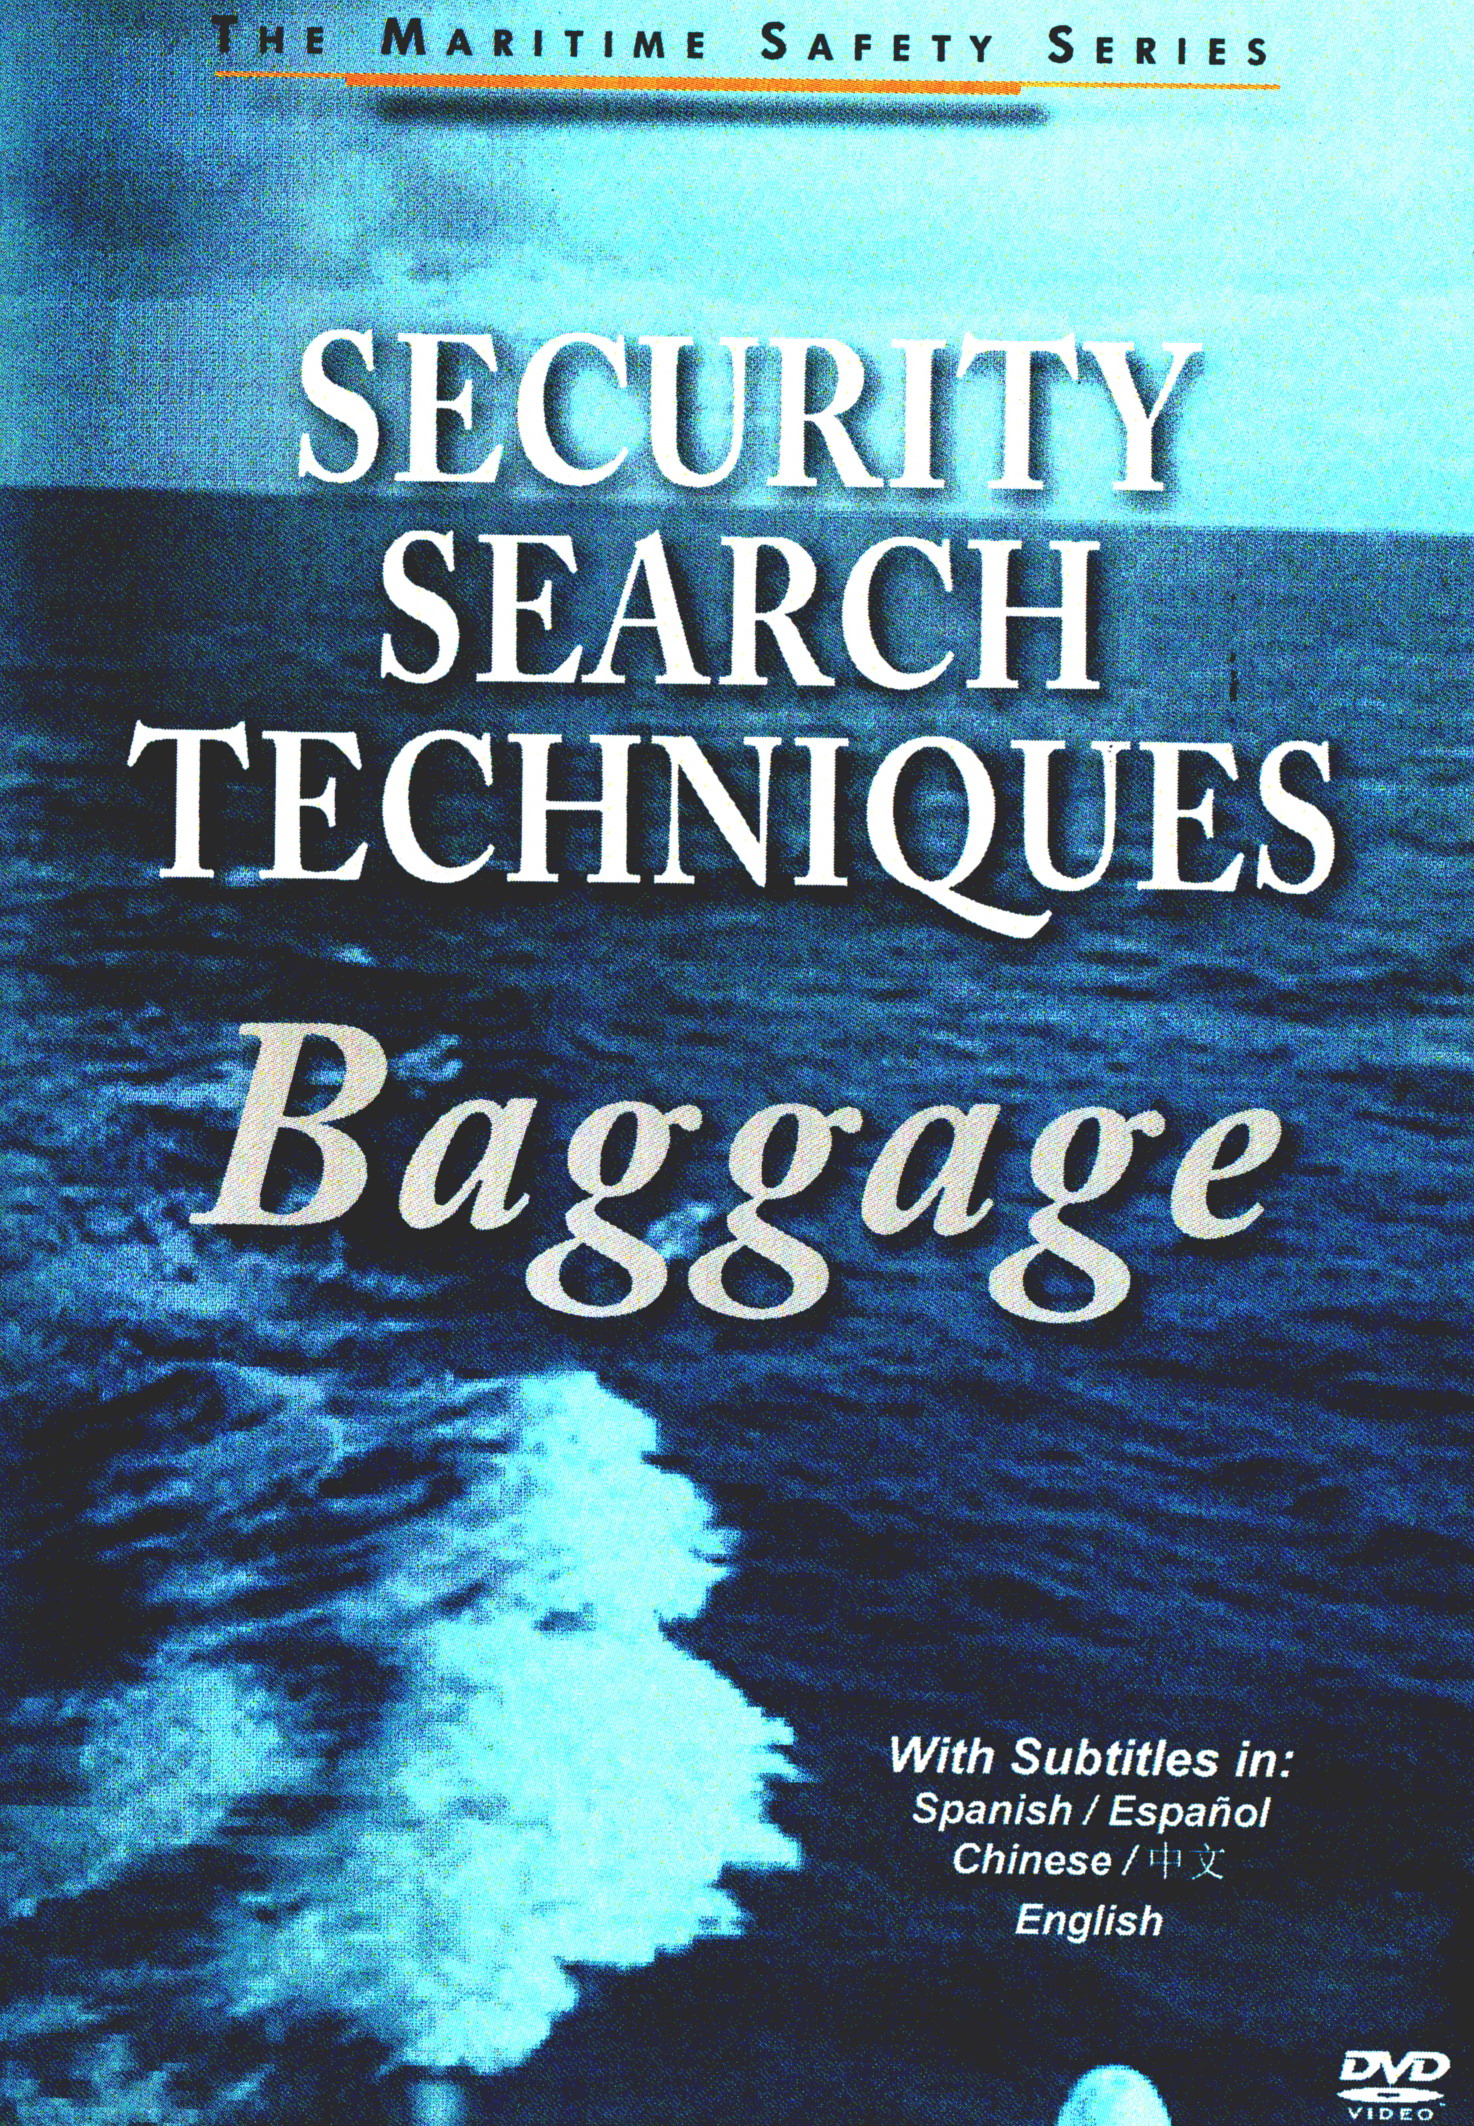 Security Search Techniques: Baggage